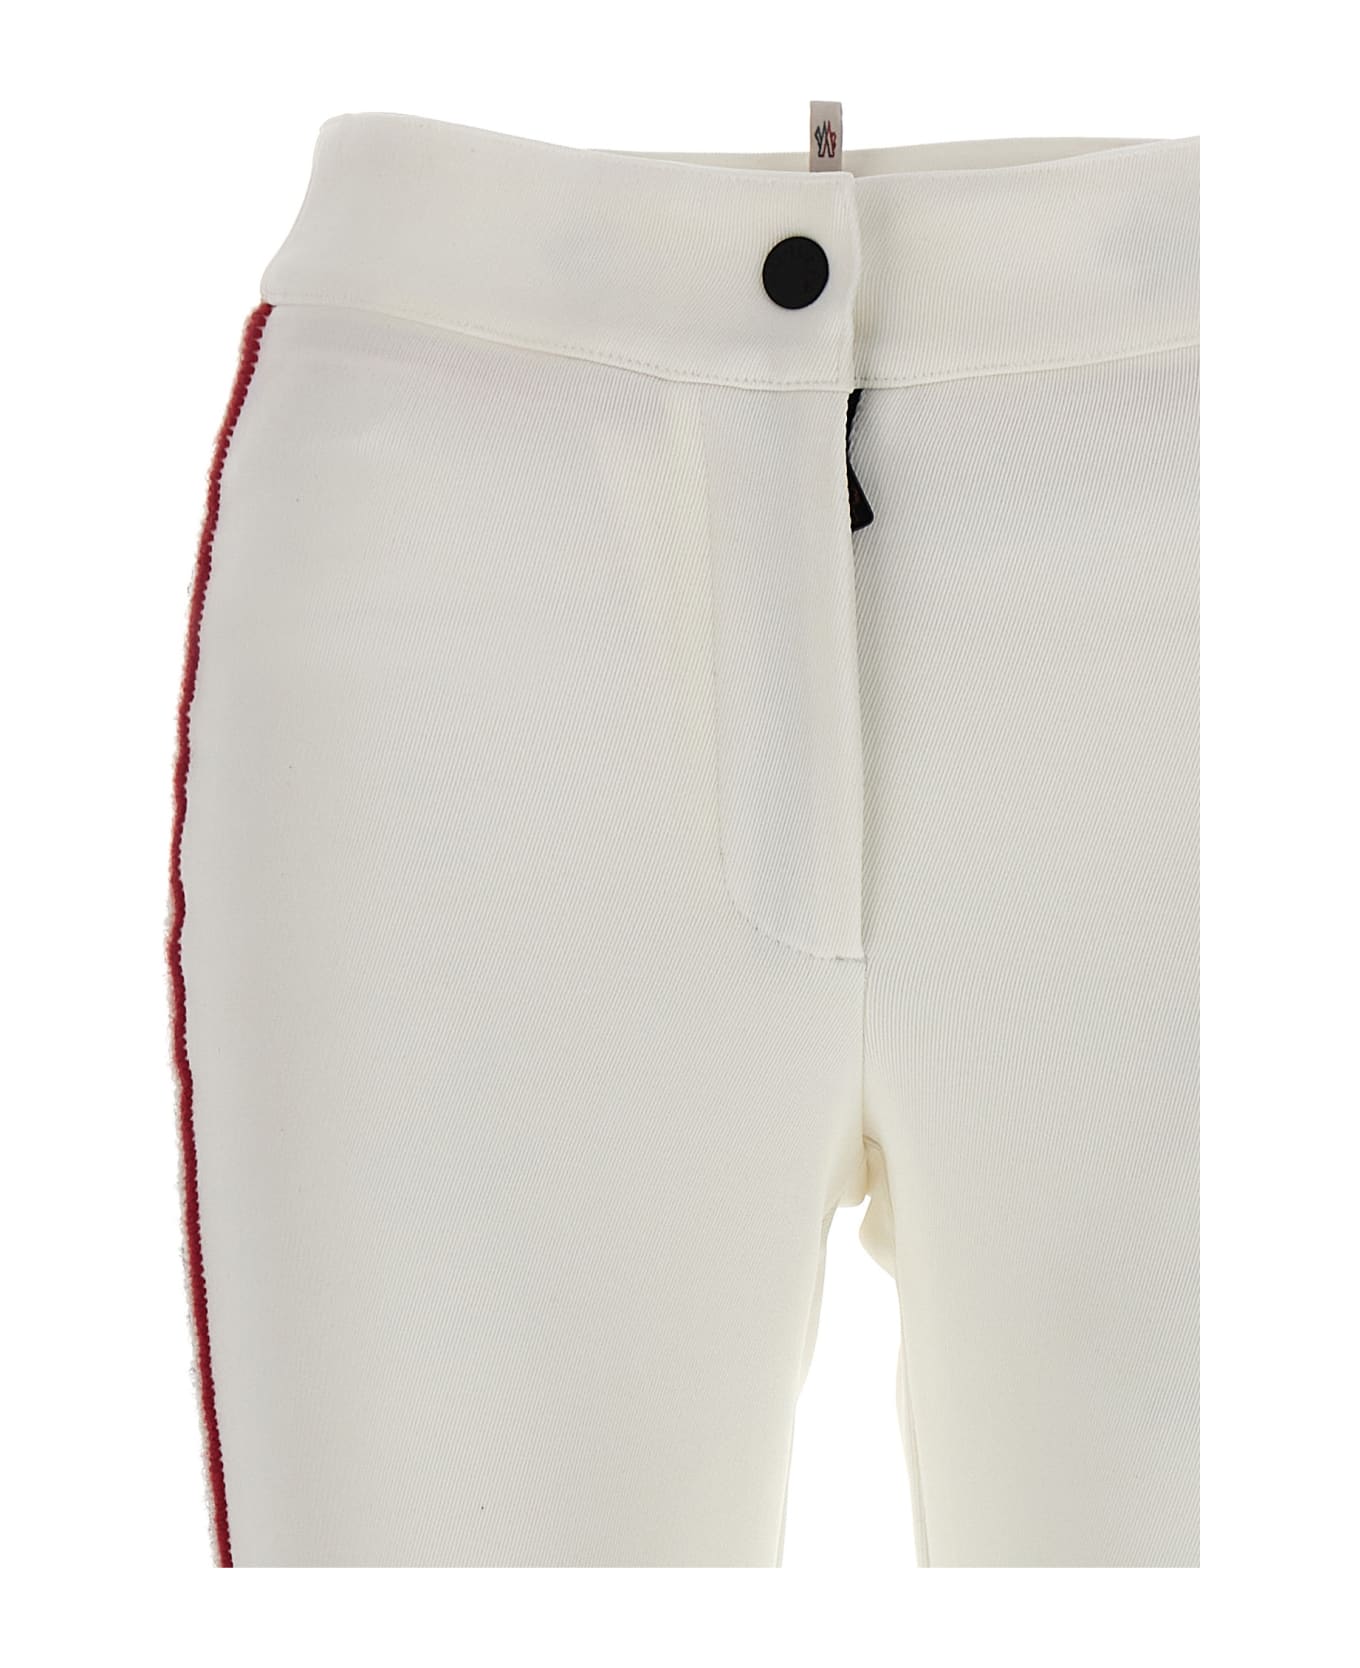 Moncler Grenoble Side Embroidery Pants - White